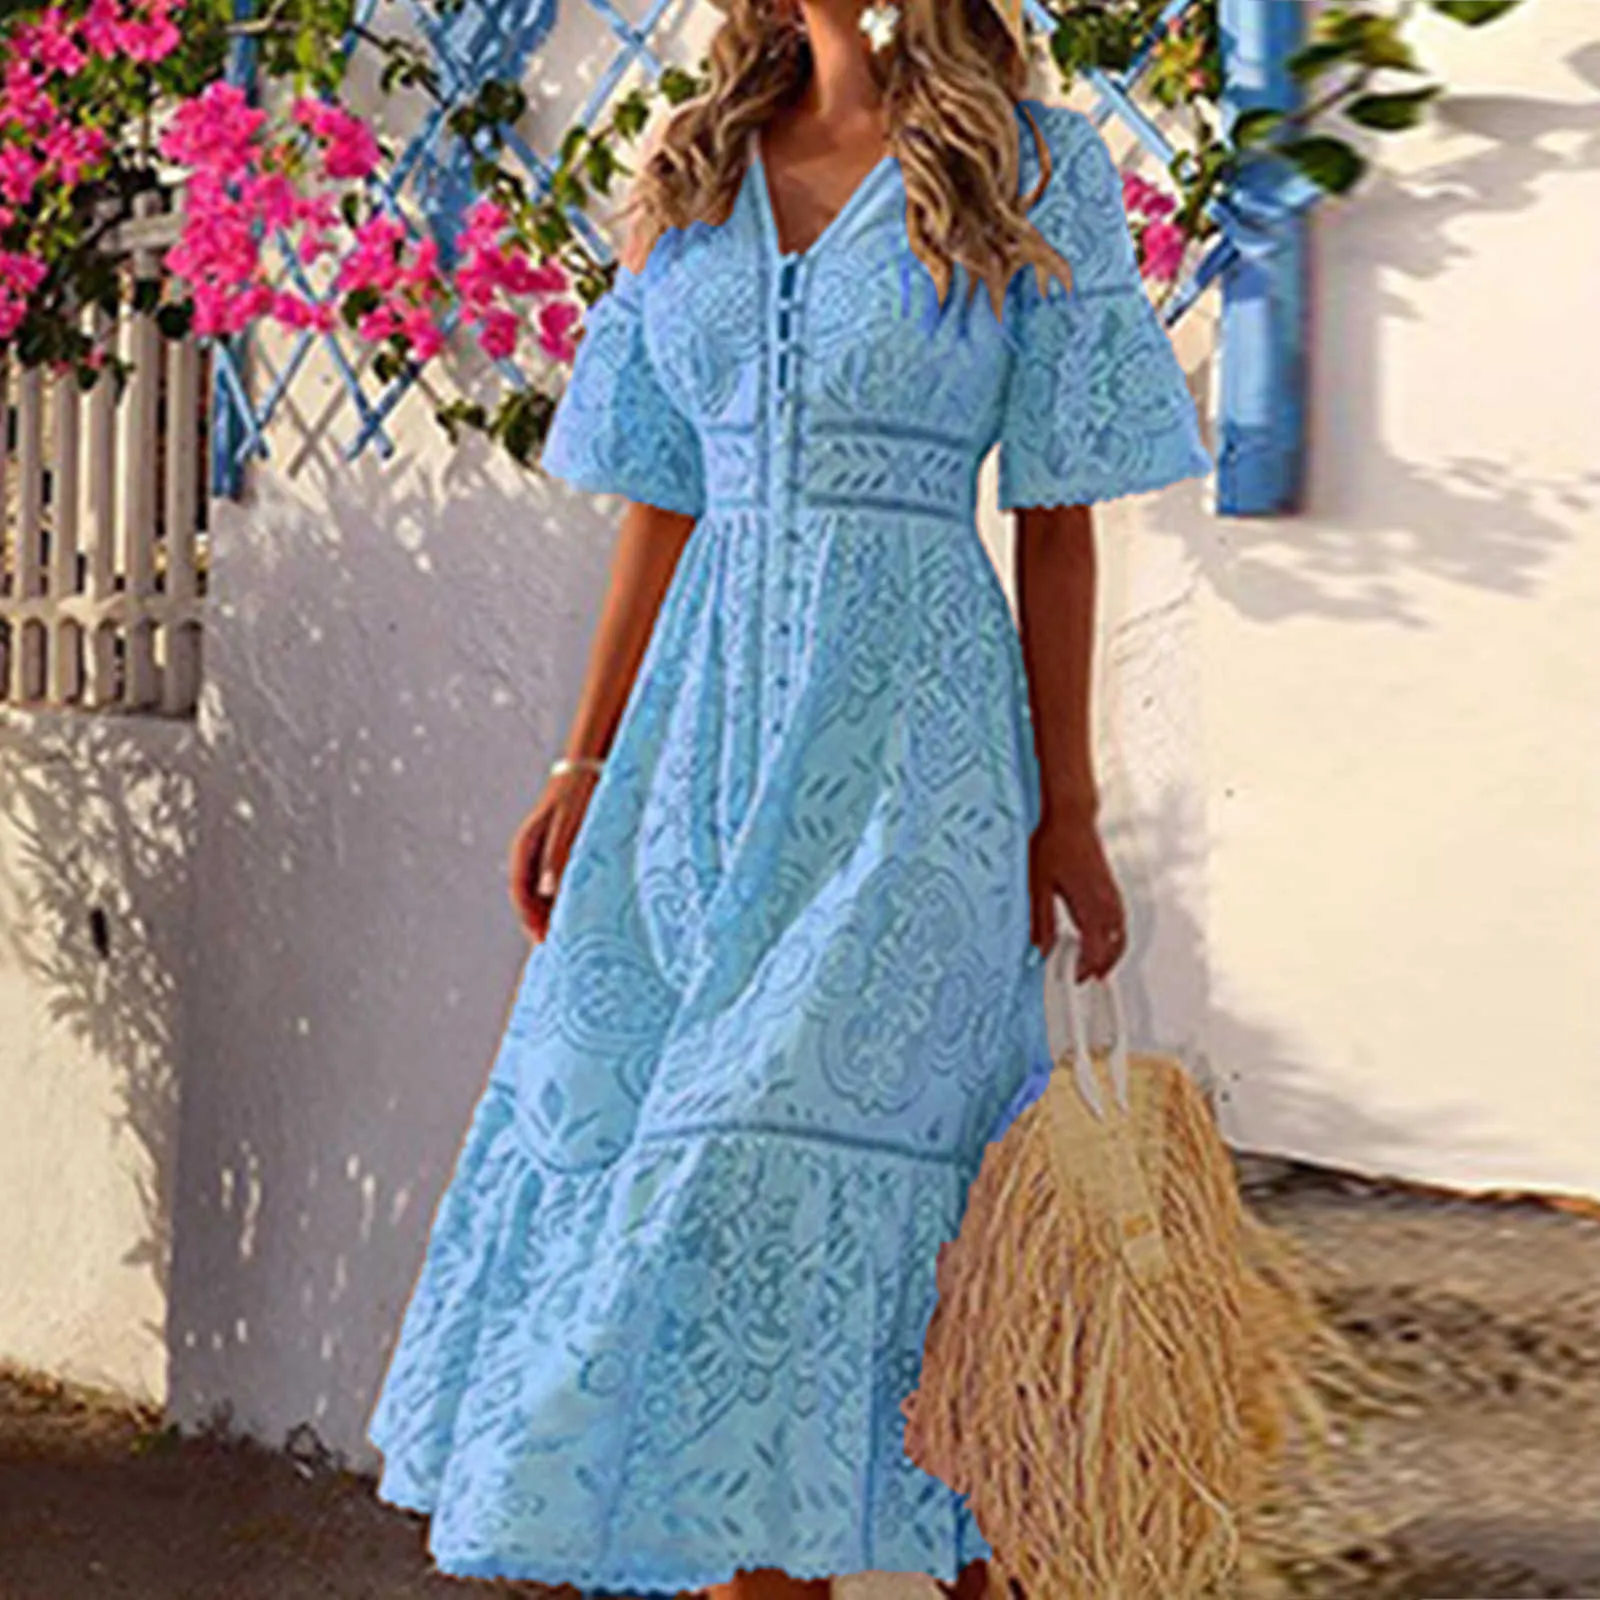 Sexy Bohemian Maxi Dresses For Women Lace Long Sleeve V Neck Boho Swing Dresses Long Cocktail Prom Gown Party Dress Robe Femme Q073014324